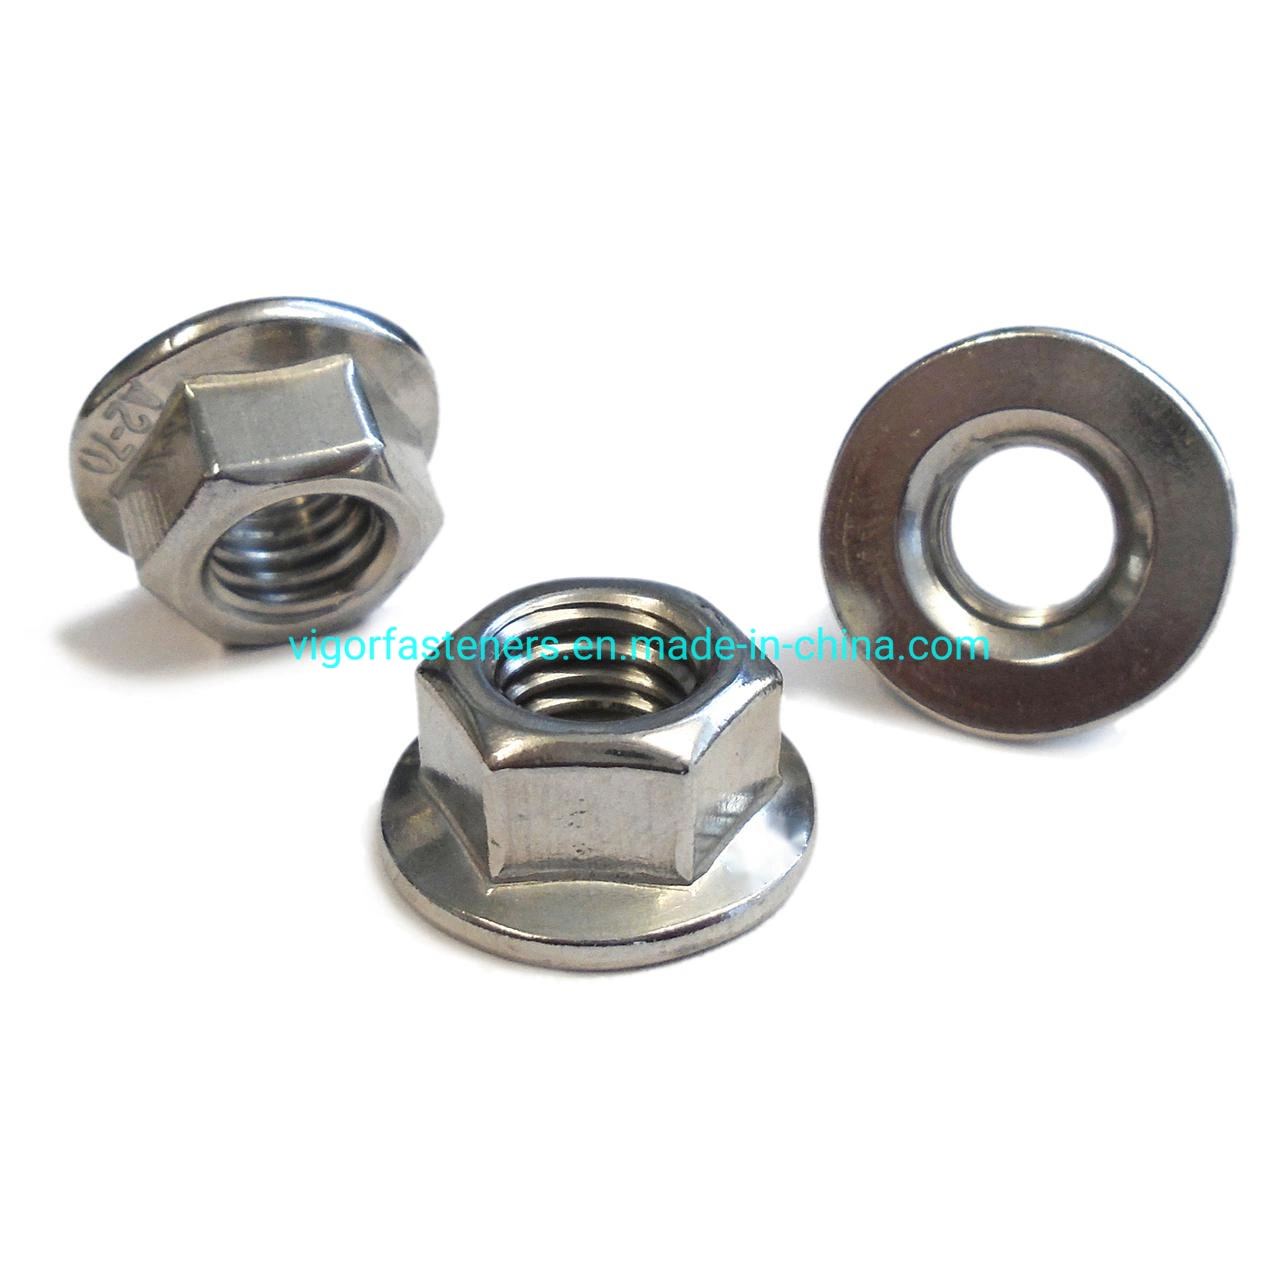 Stainless Steel 304 DIN6923 Hex Flange Nuts Non Serrated A2 Hex Nuts Hexagon Nuts Wheel Nuts Motorcycle Accessories Auto Parts A2 Nut